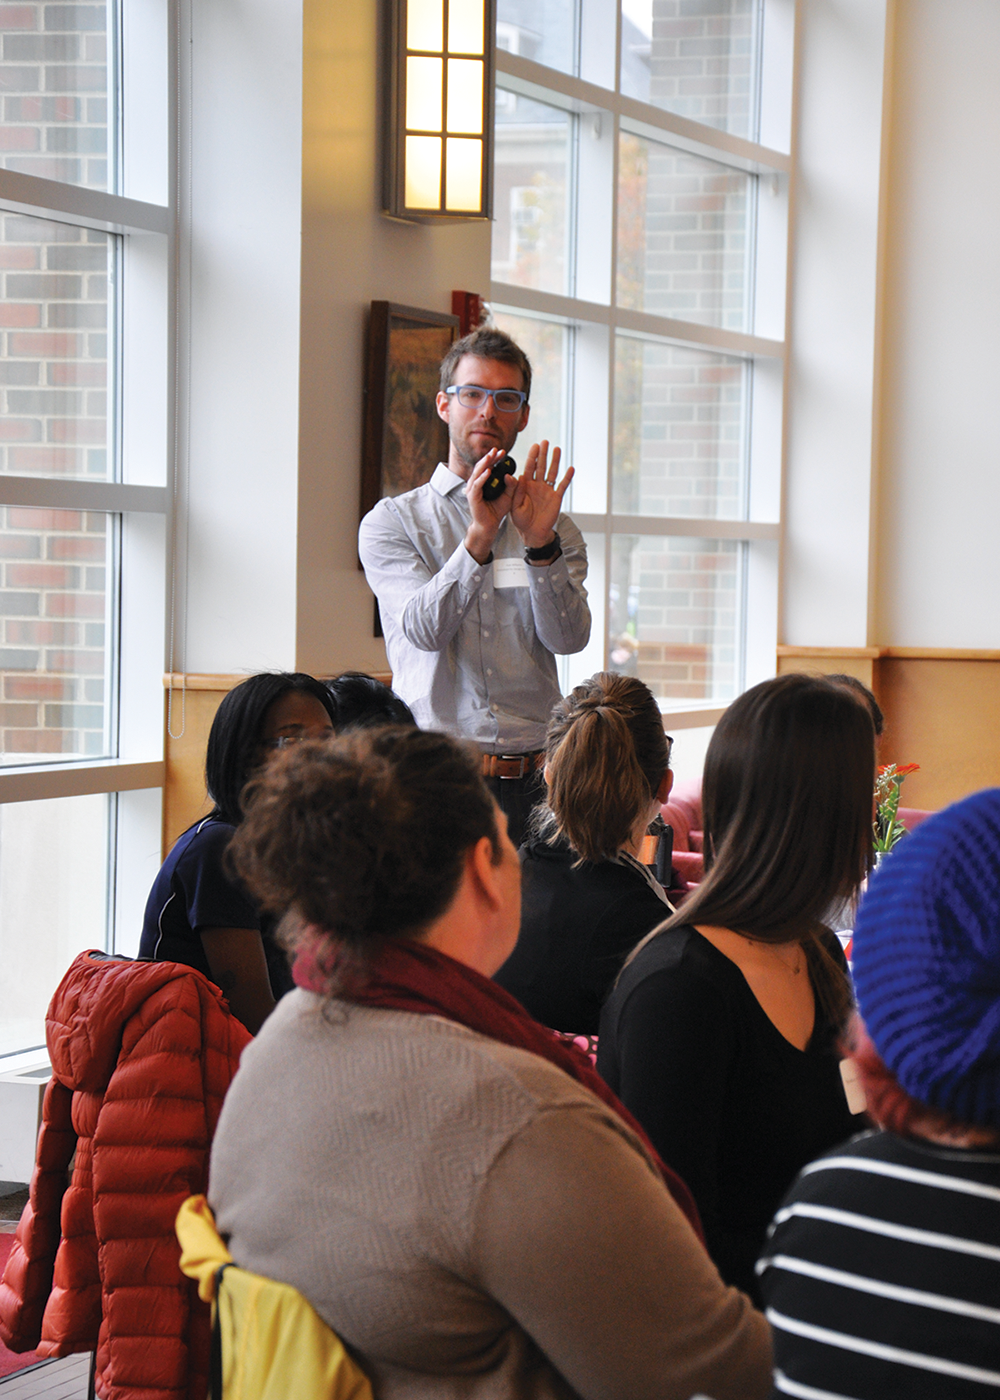 Kyle Williams visits campus to explain design thinking principles to LAS faculty and staff. (Photo by Heather Gillett.) 